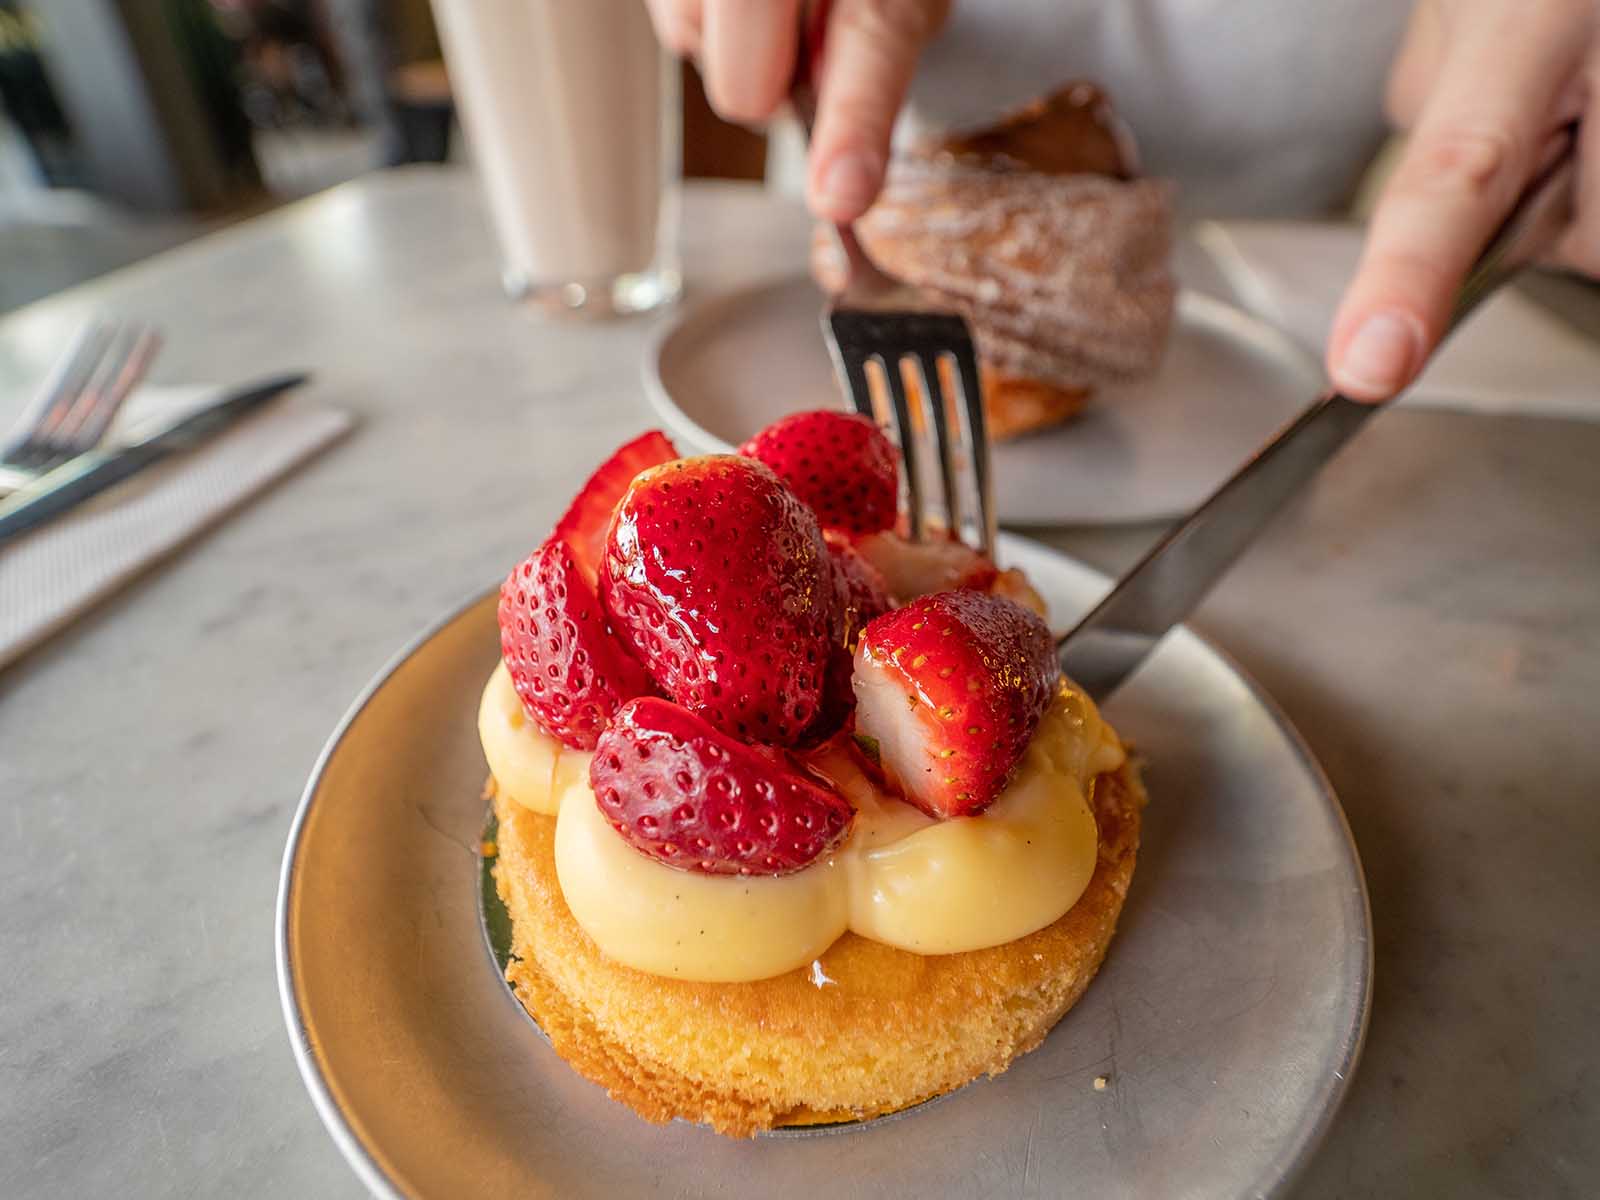 BamBam Bakehouse sweet treats | Only one day in town? How to travel from BNE Airport to the Gold Coast in a day